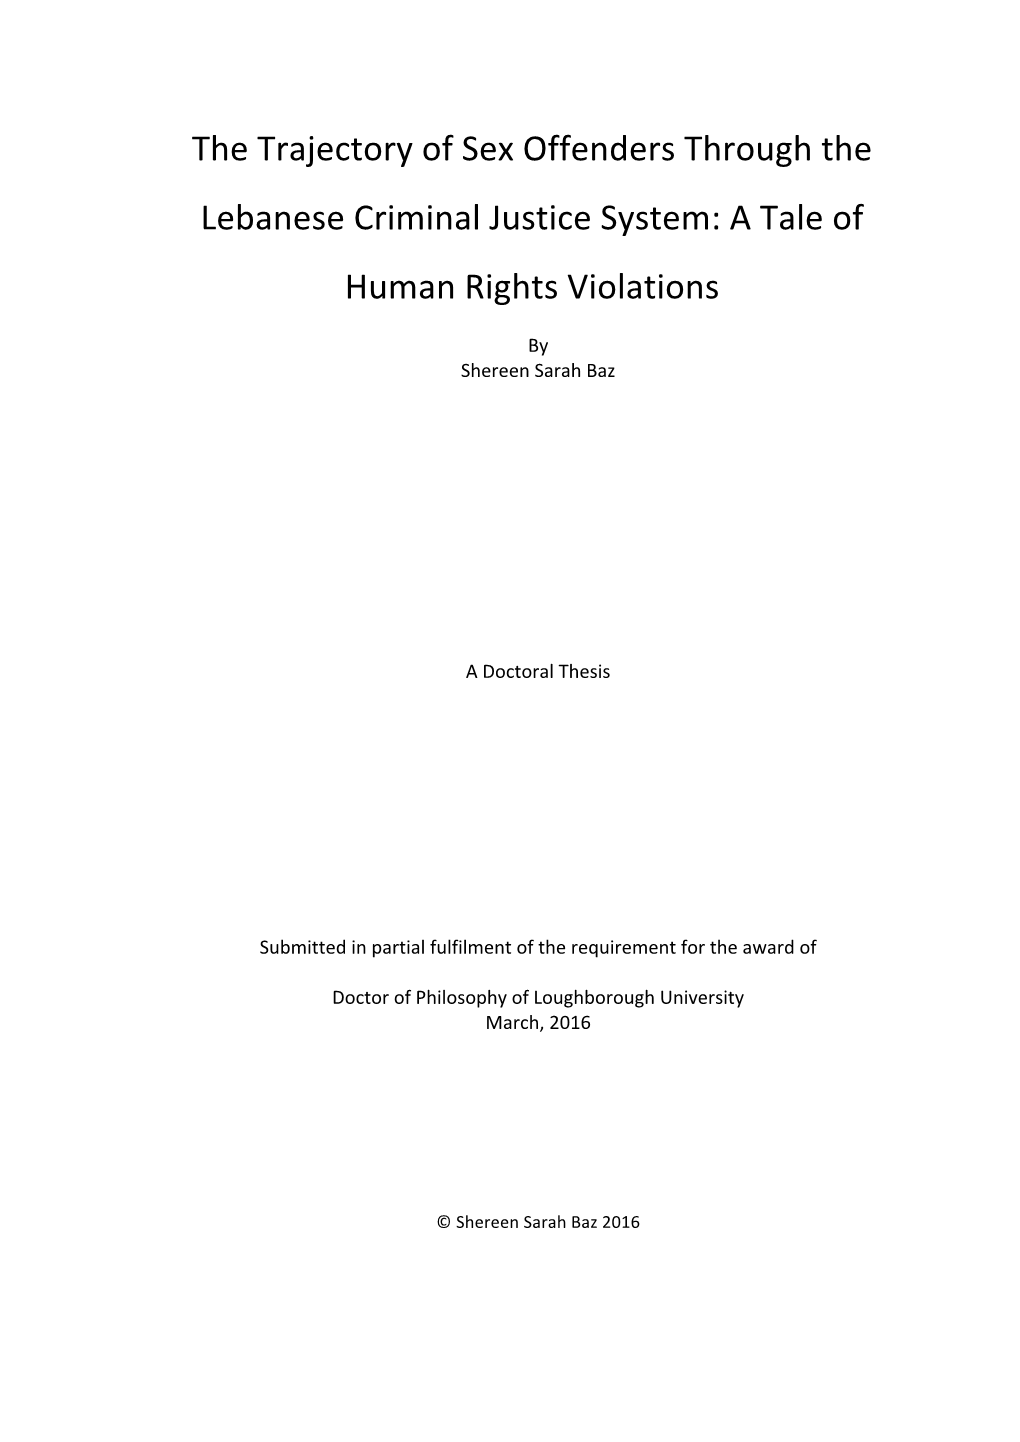 The Trajectory of Sex Offenders Through the Lebanese Criminal Justice System: a Tale of Human Rights Violations